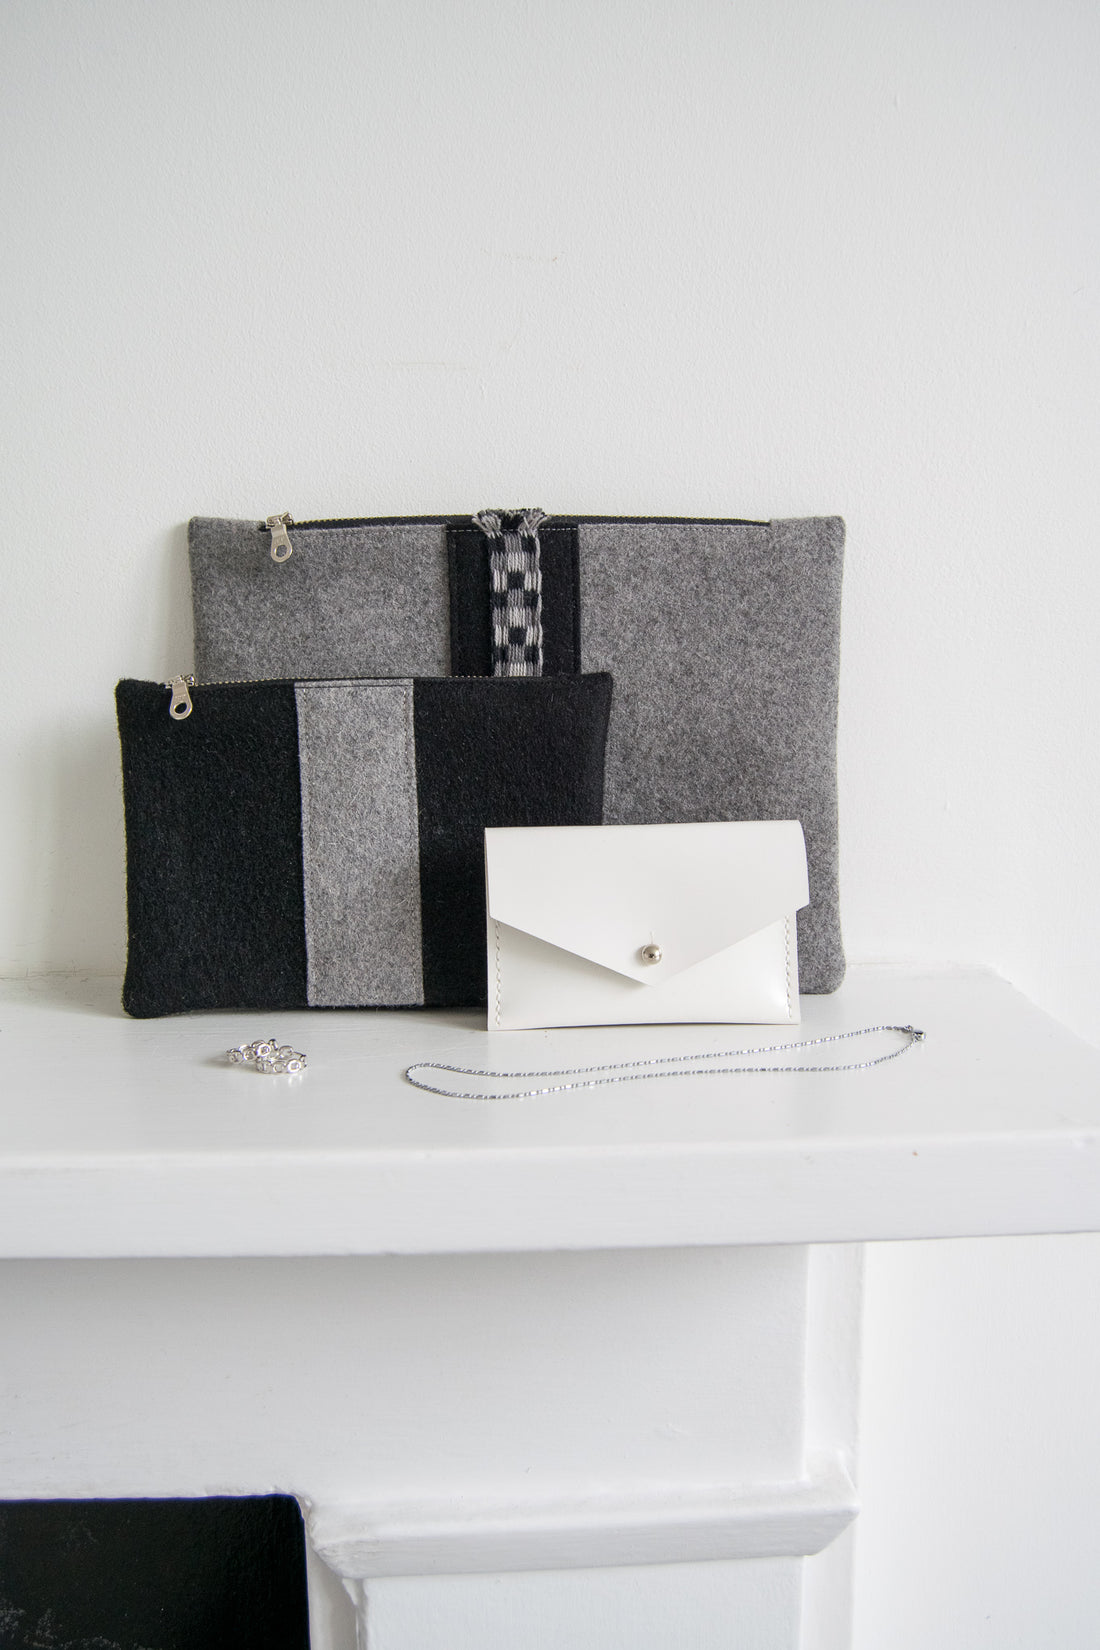 Gray and black wool zip pouches paired with a white leather card holder and silver jewelry on white mantel.